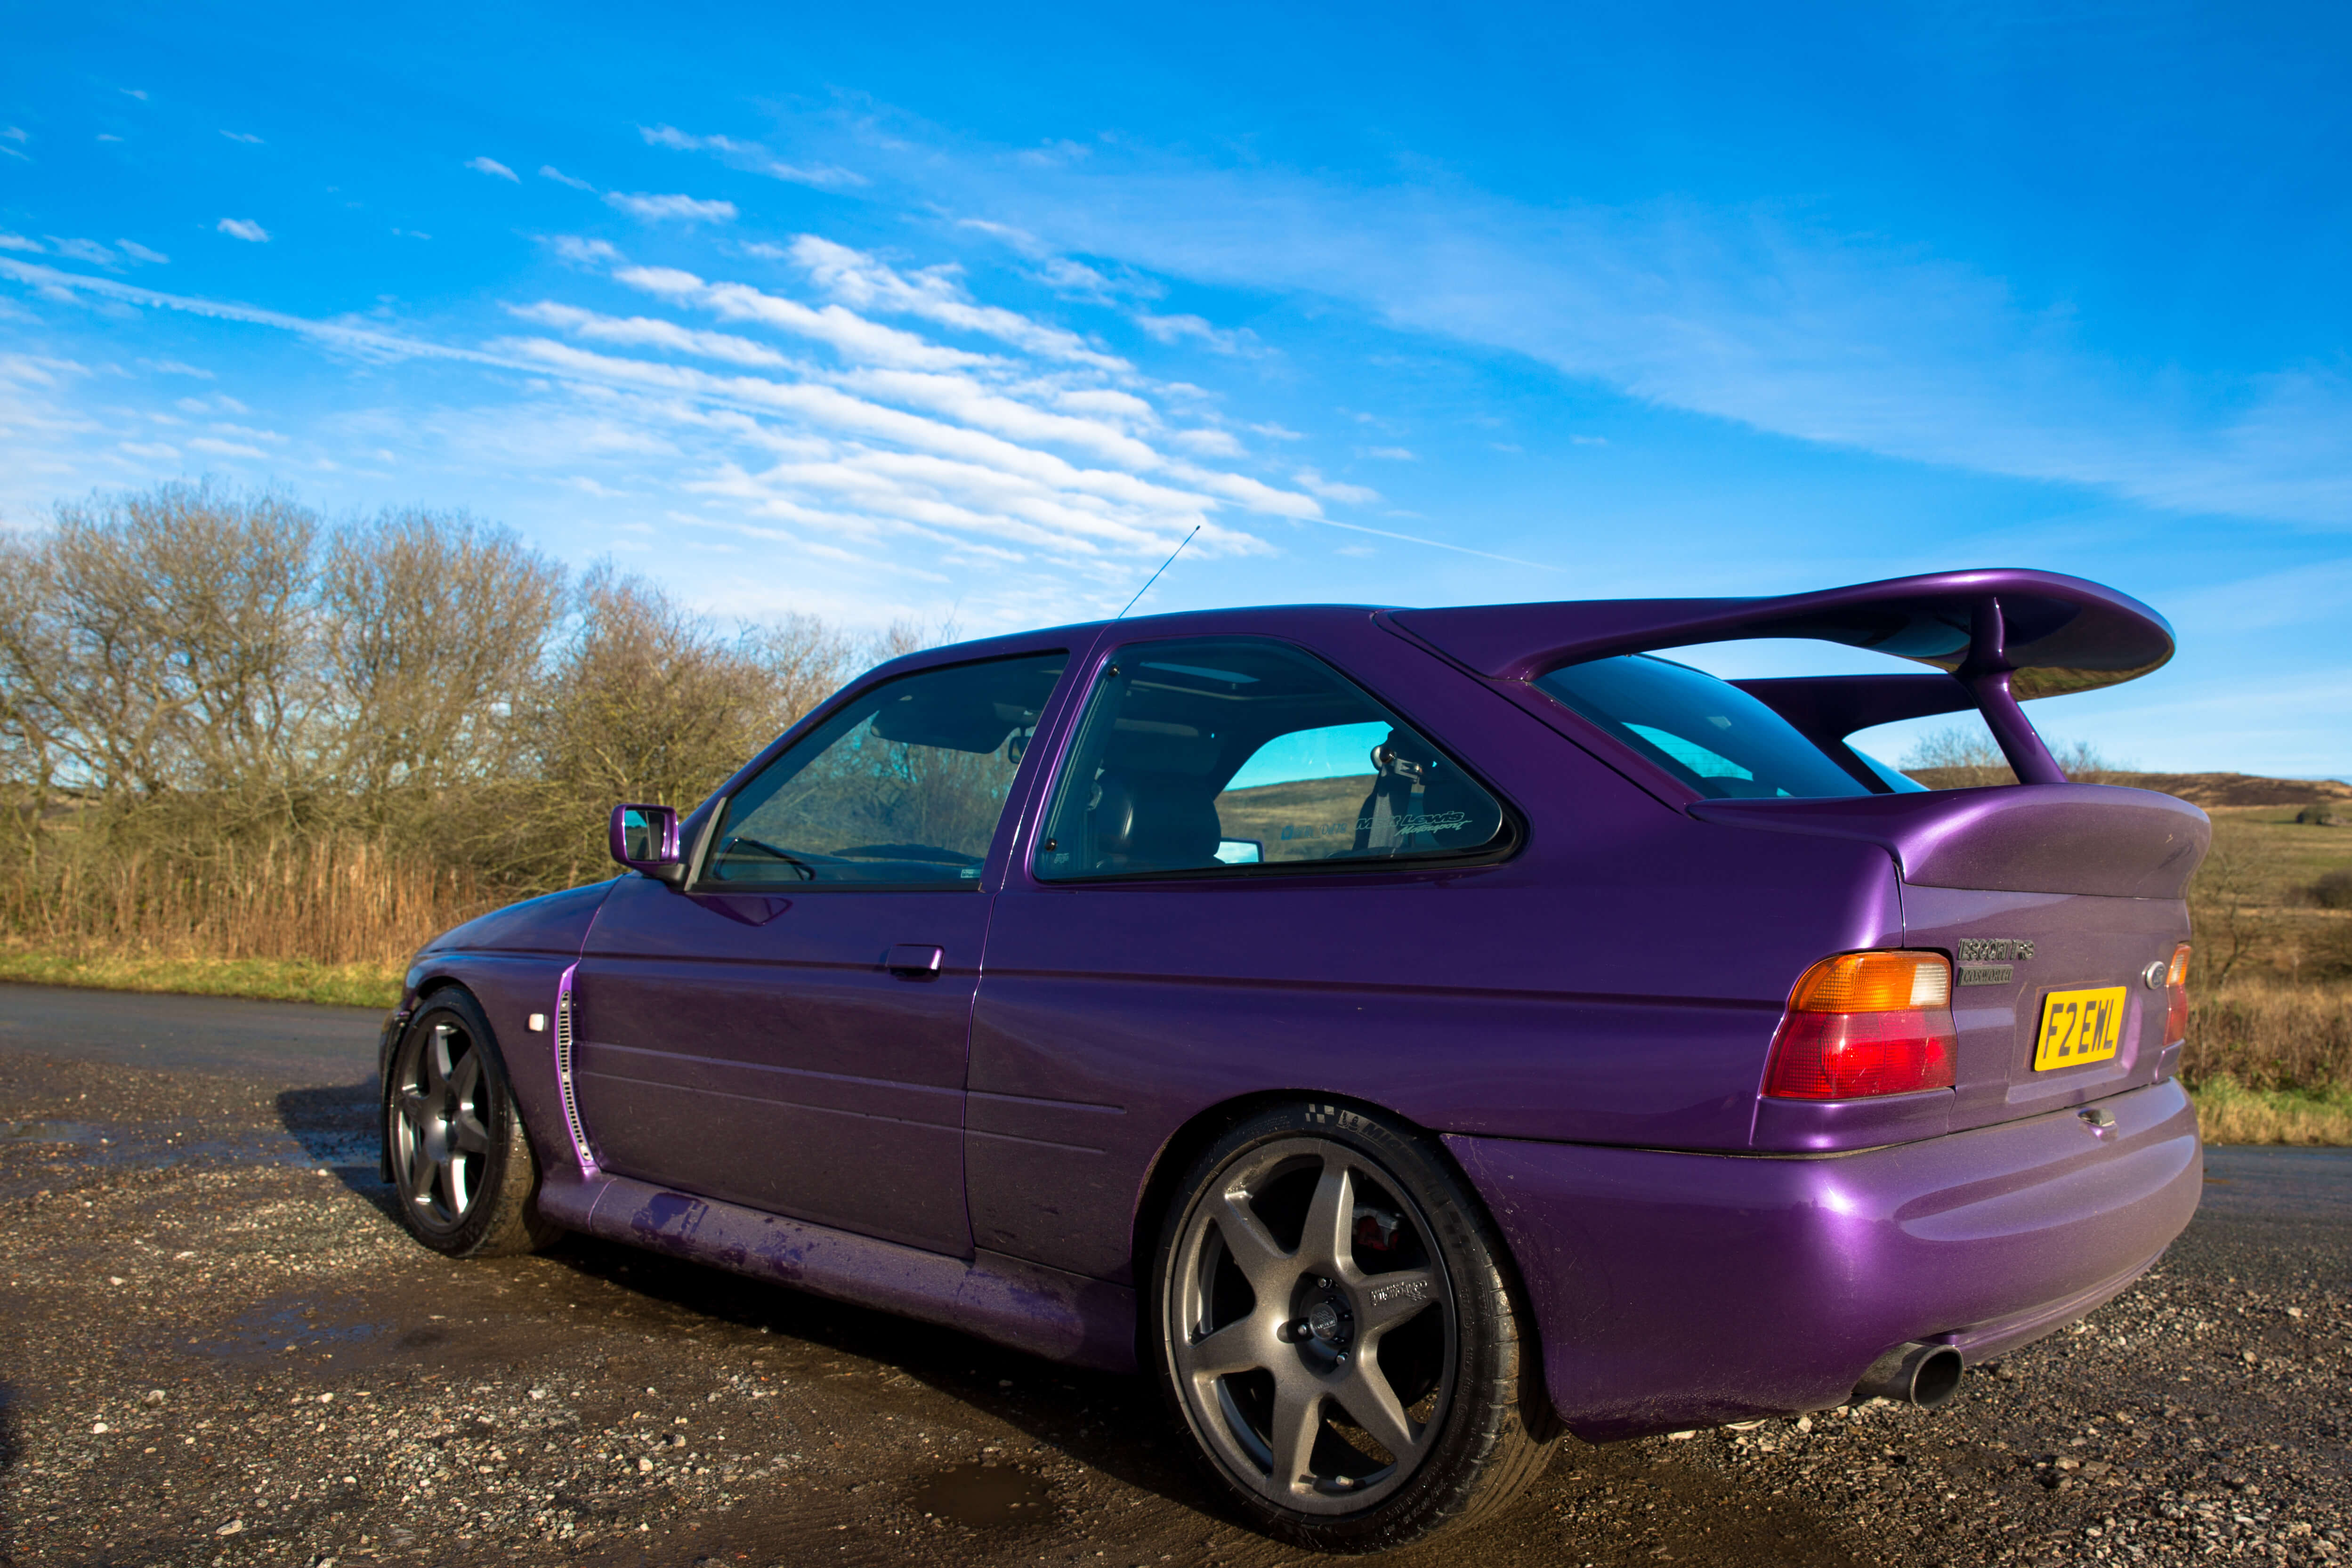 Purple Escort Cosworth shown from the back with blue sky in view